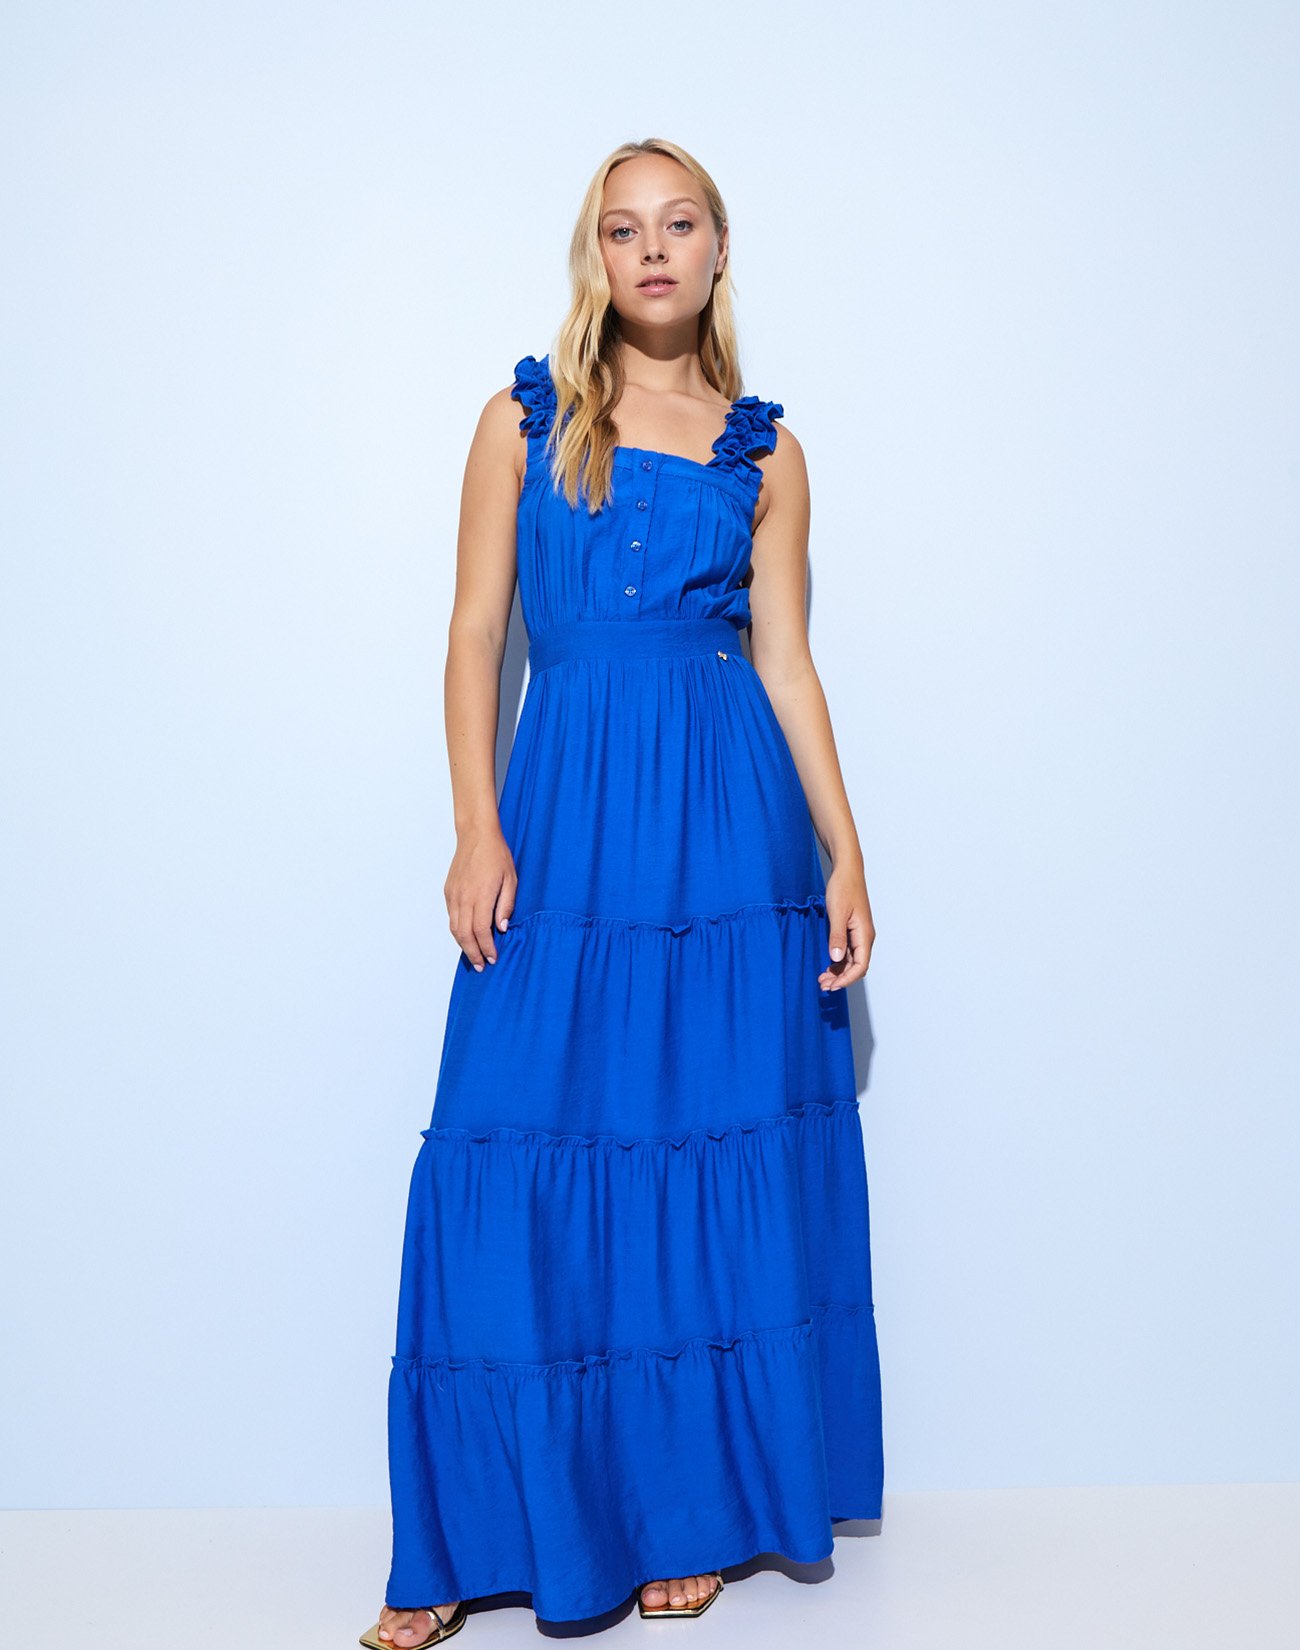 Maxi dress with bow